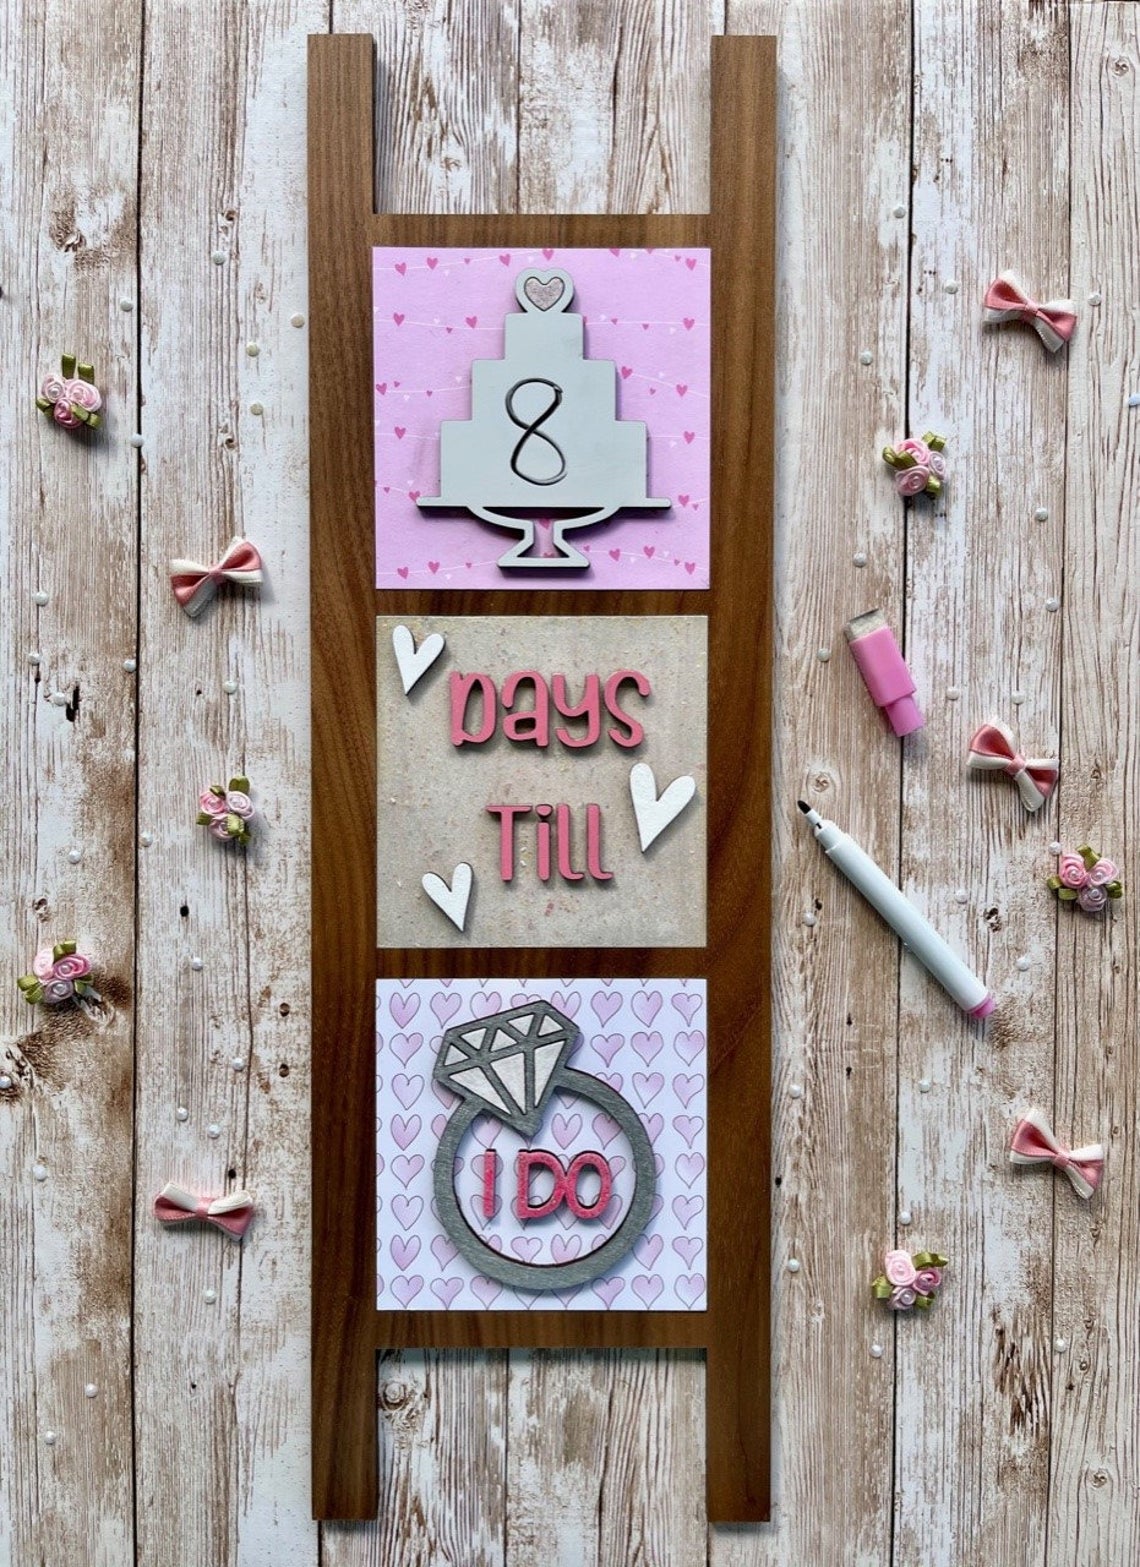 ___ Days Until I DO Ready to Paint Leaning Ladder Sign with Dry Erase Countdown Tile